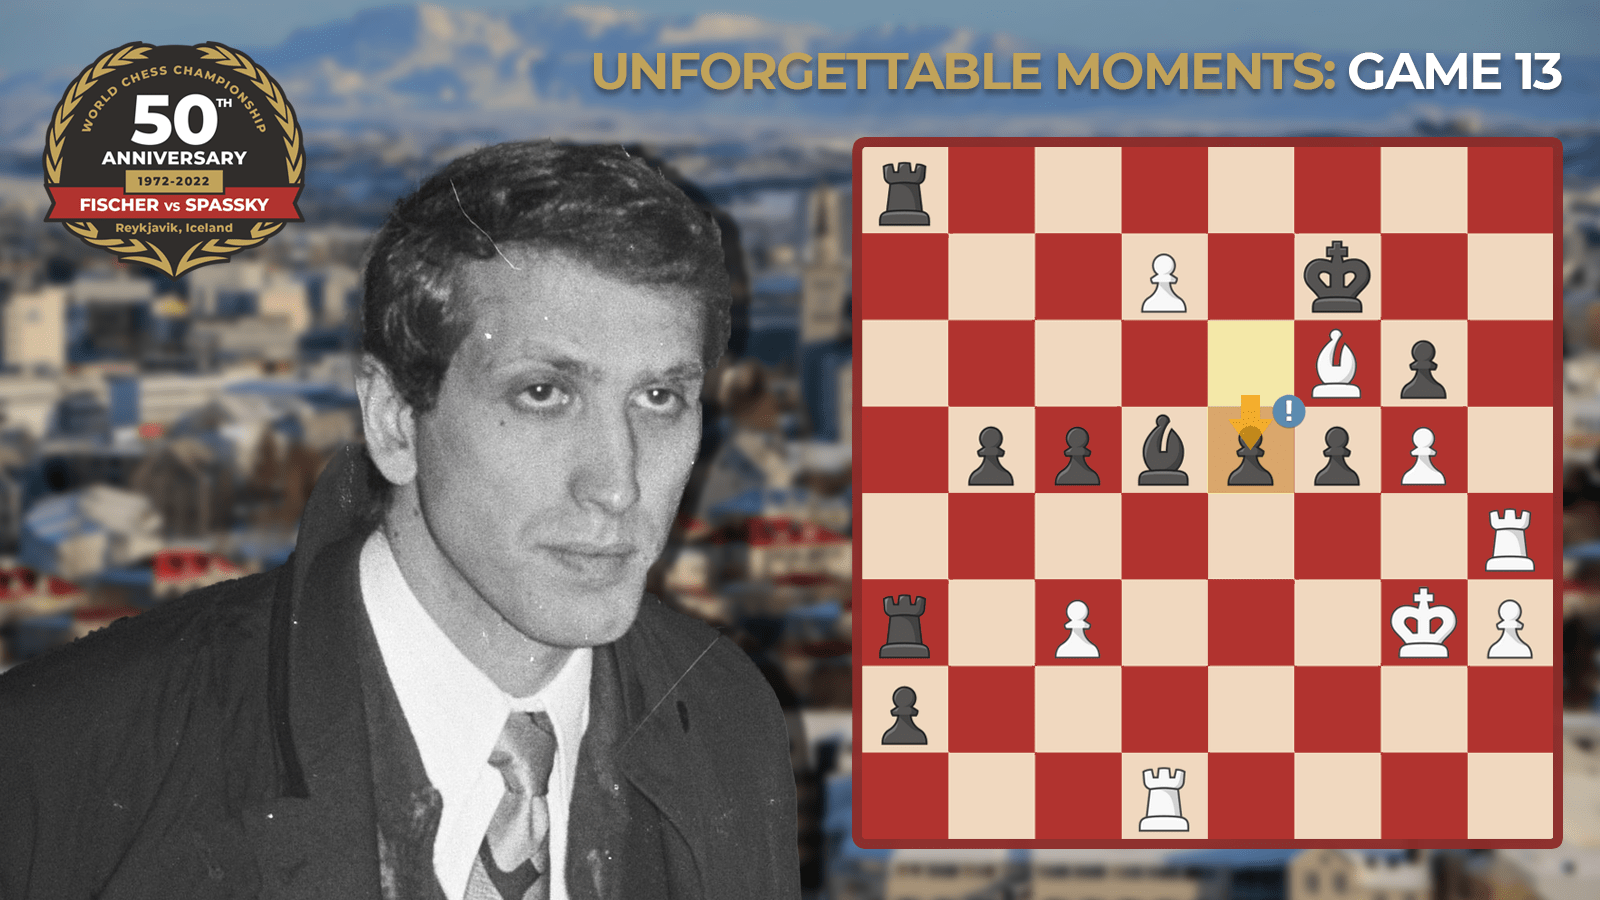 Bobby Fischer Wins A Chaotic Brilliancy 